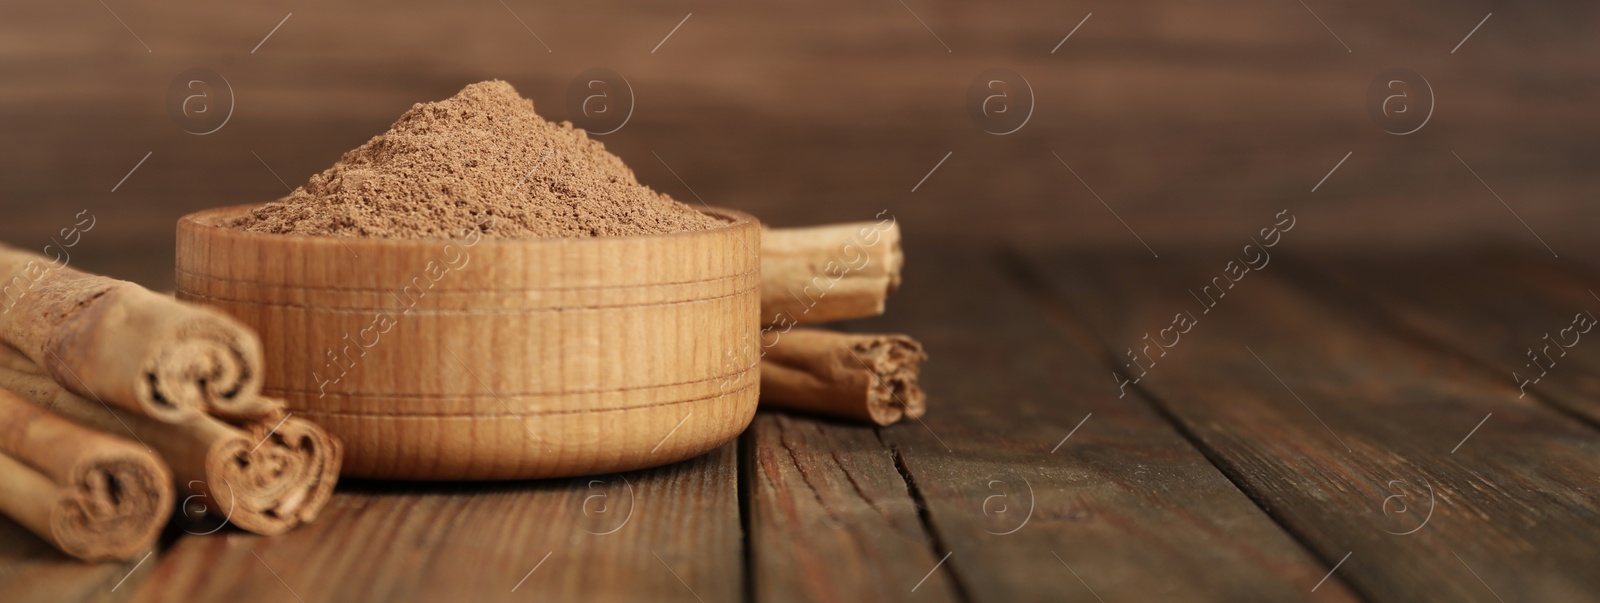 Image of Cinnamon powder and sticks on wooden table, space for text. Banner design